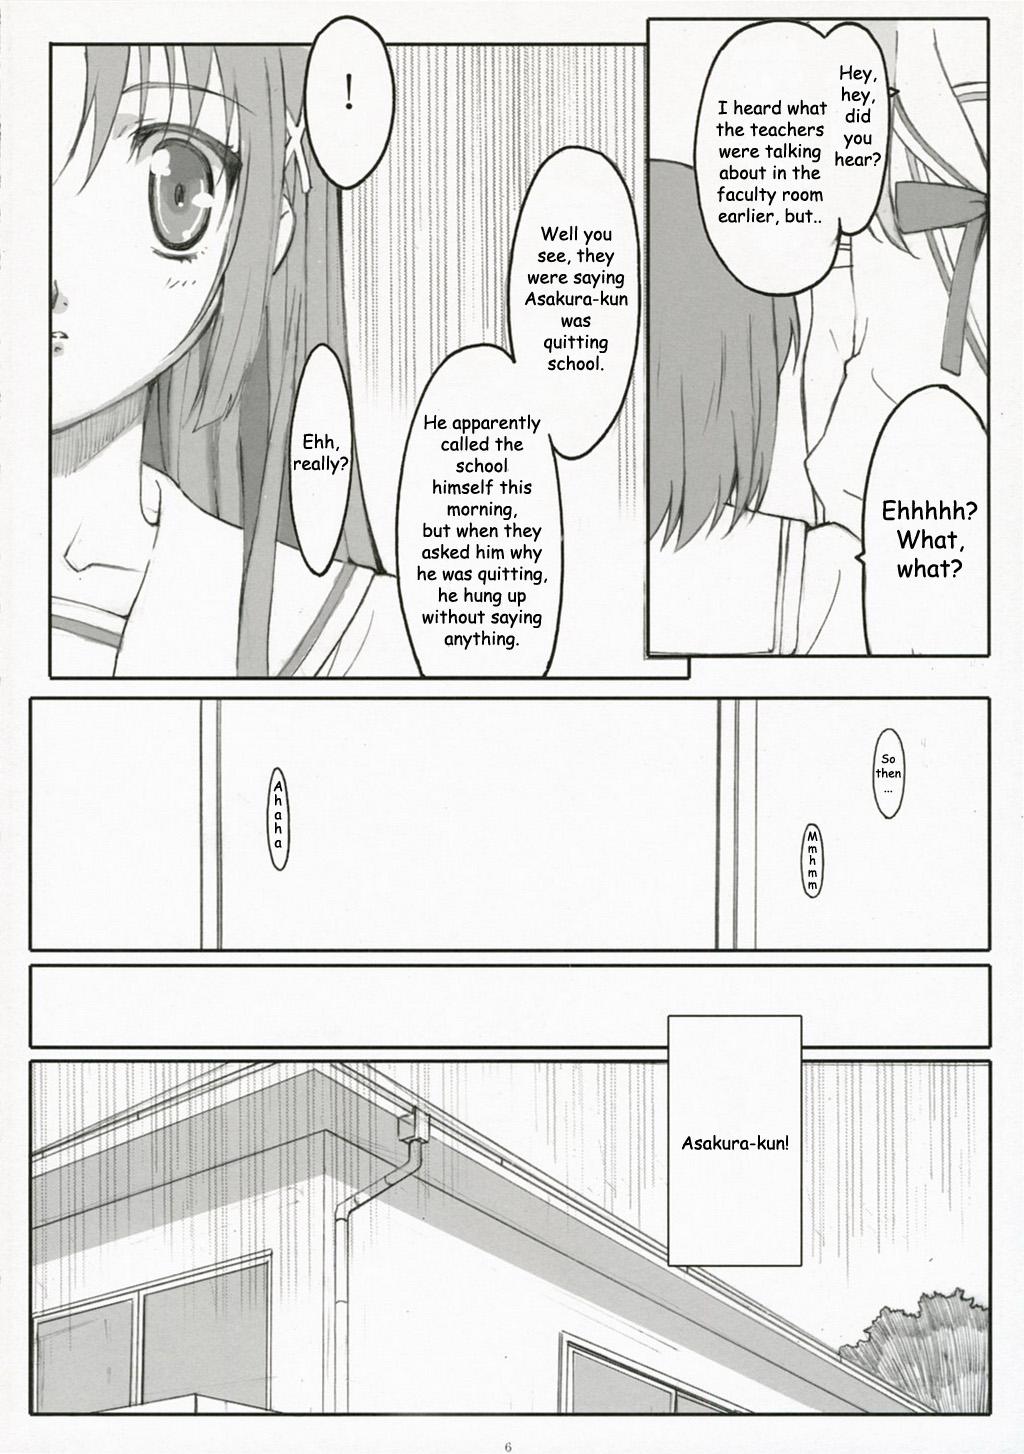 Strip Endless Summer Chapter-2 - Da capo Missionary Position Porn - Page 5